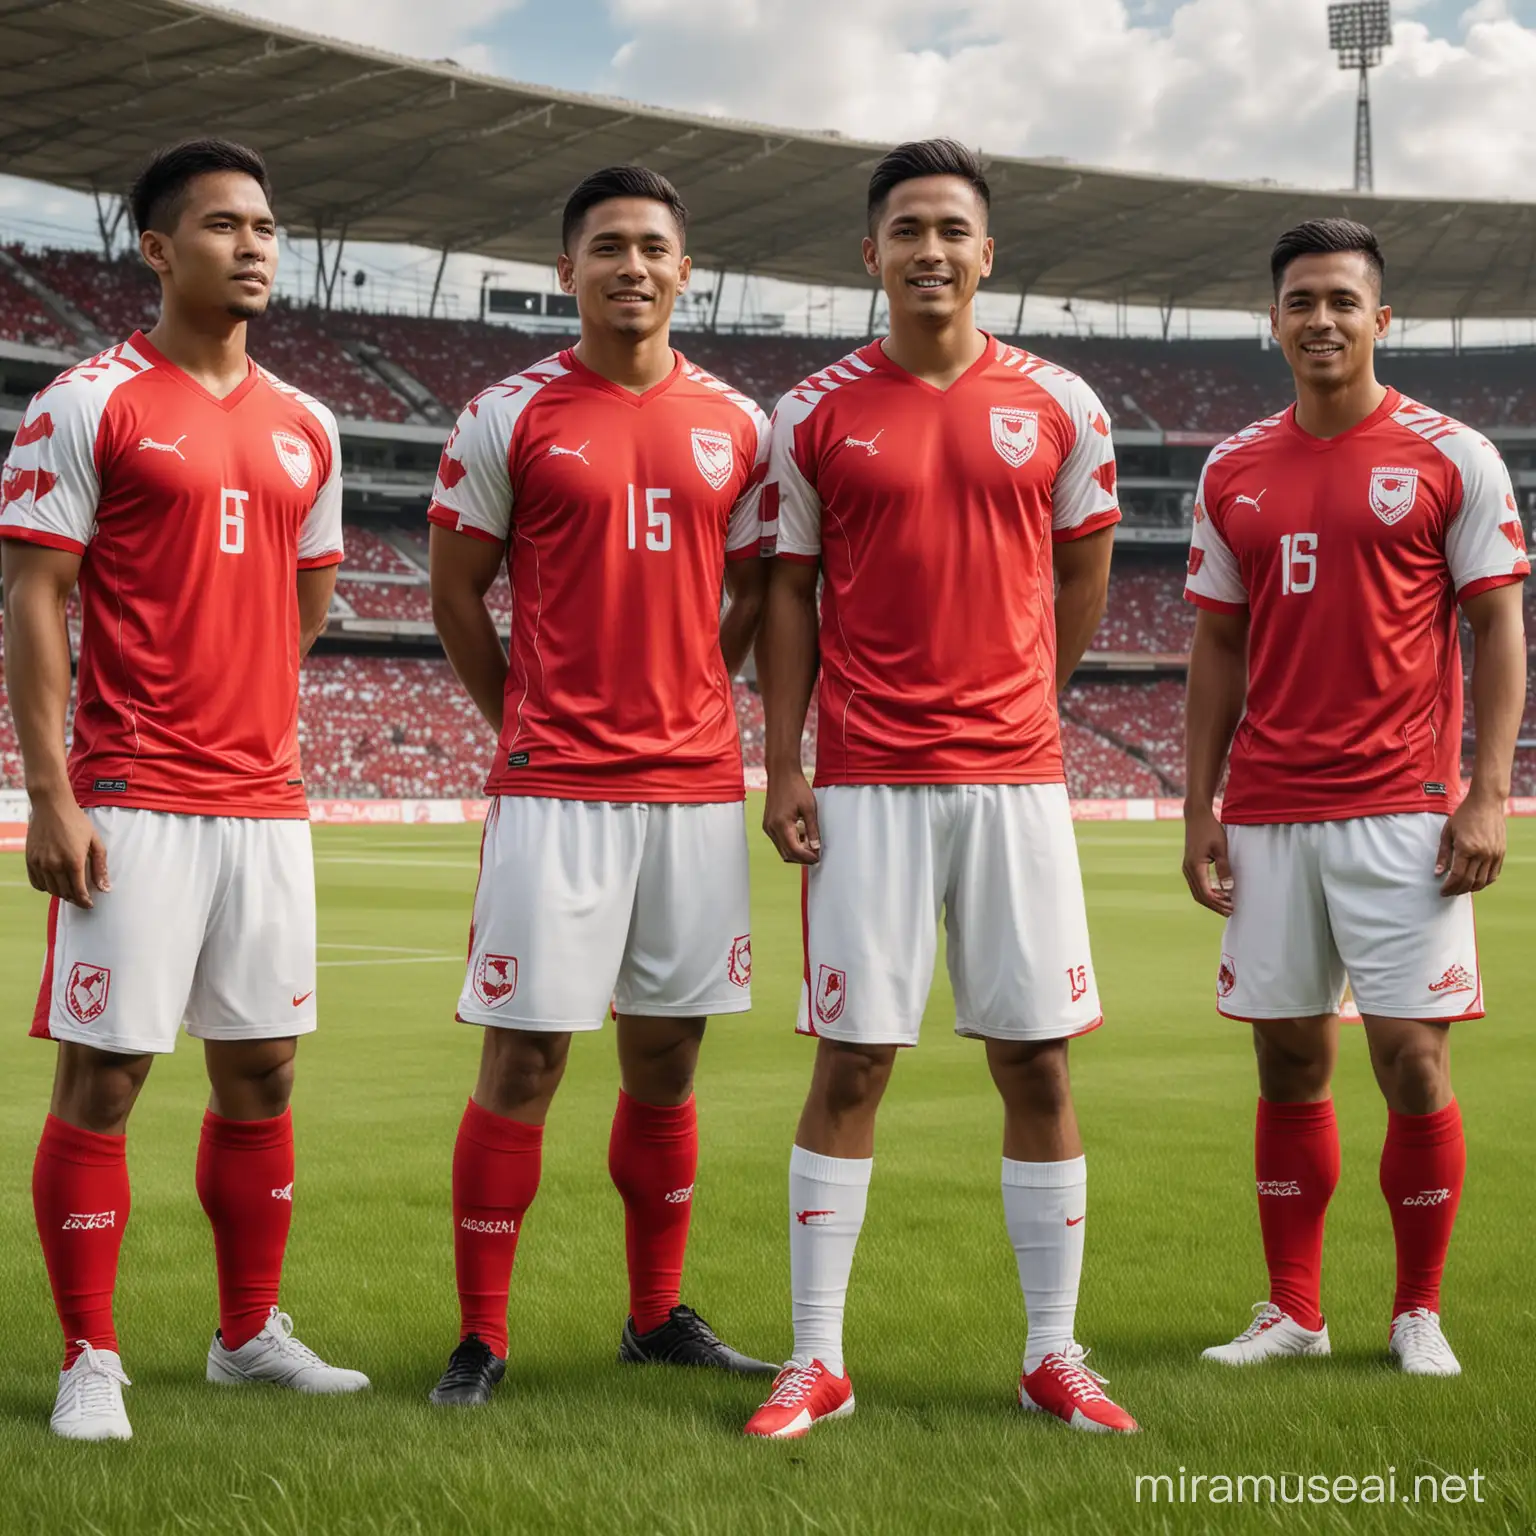 Indonesian Mens Soccer Team in Stunning Red and White Uniforms at Maracan Stadium